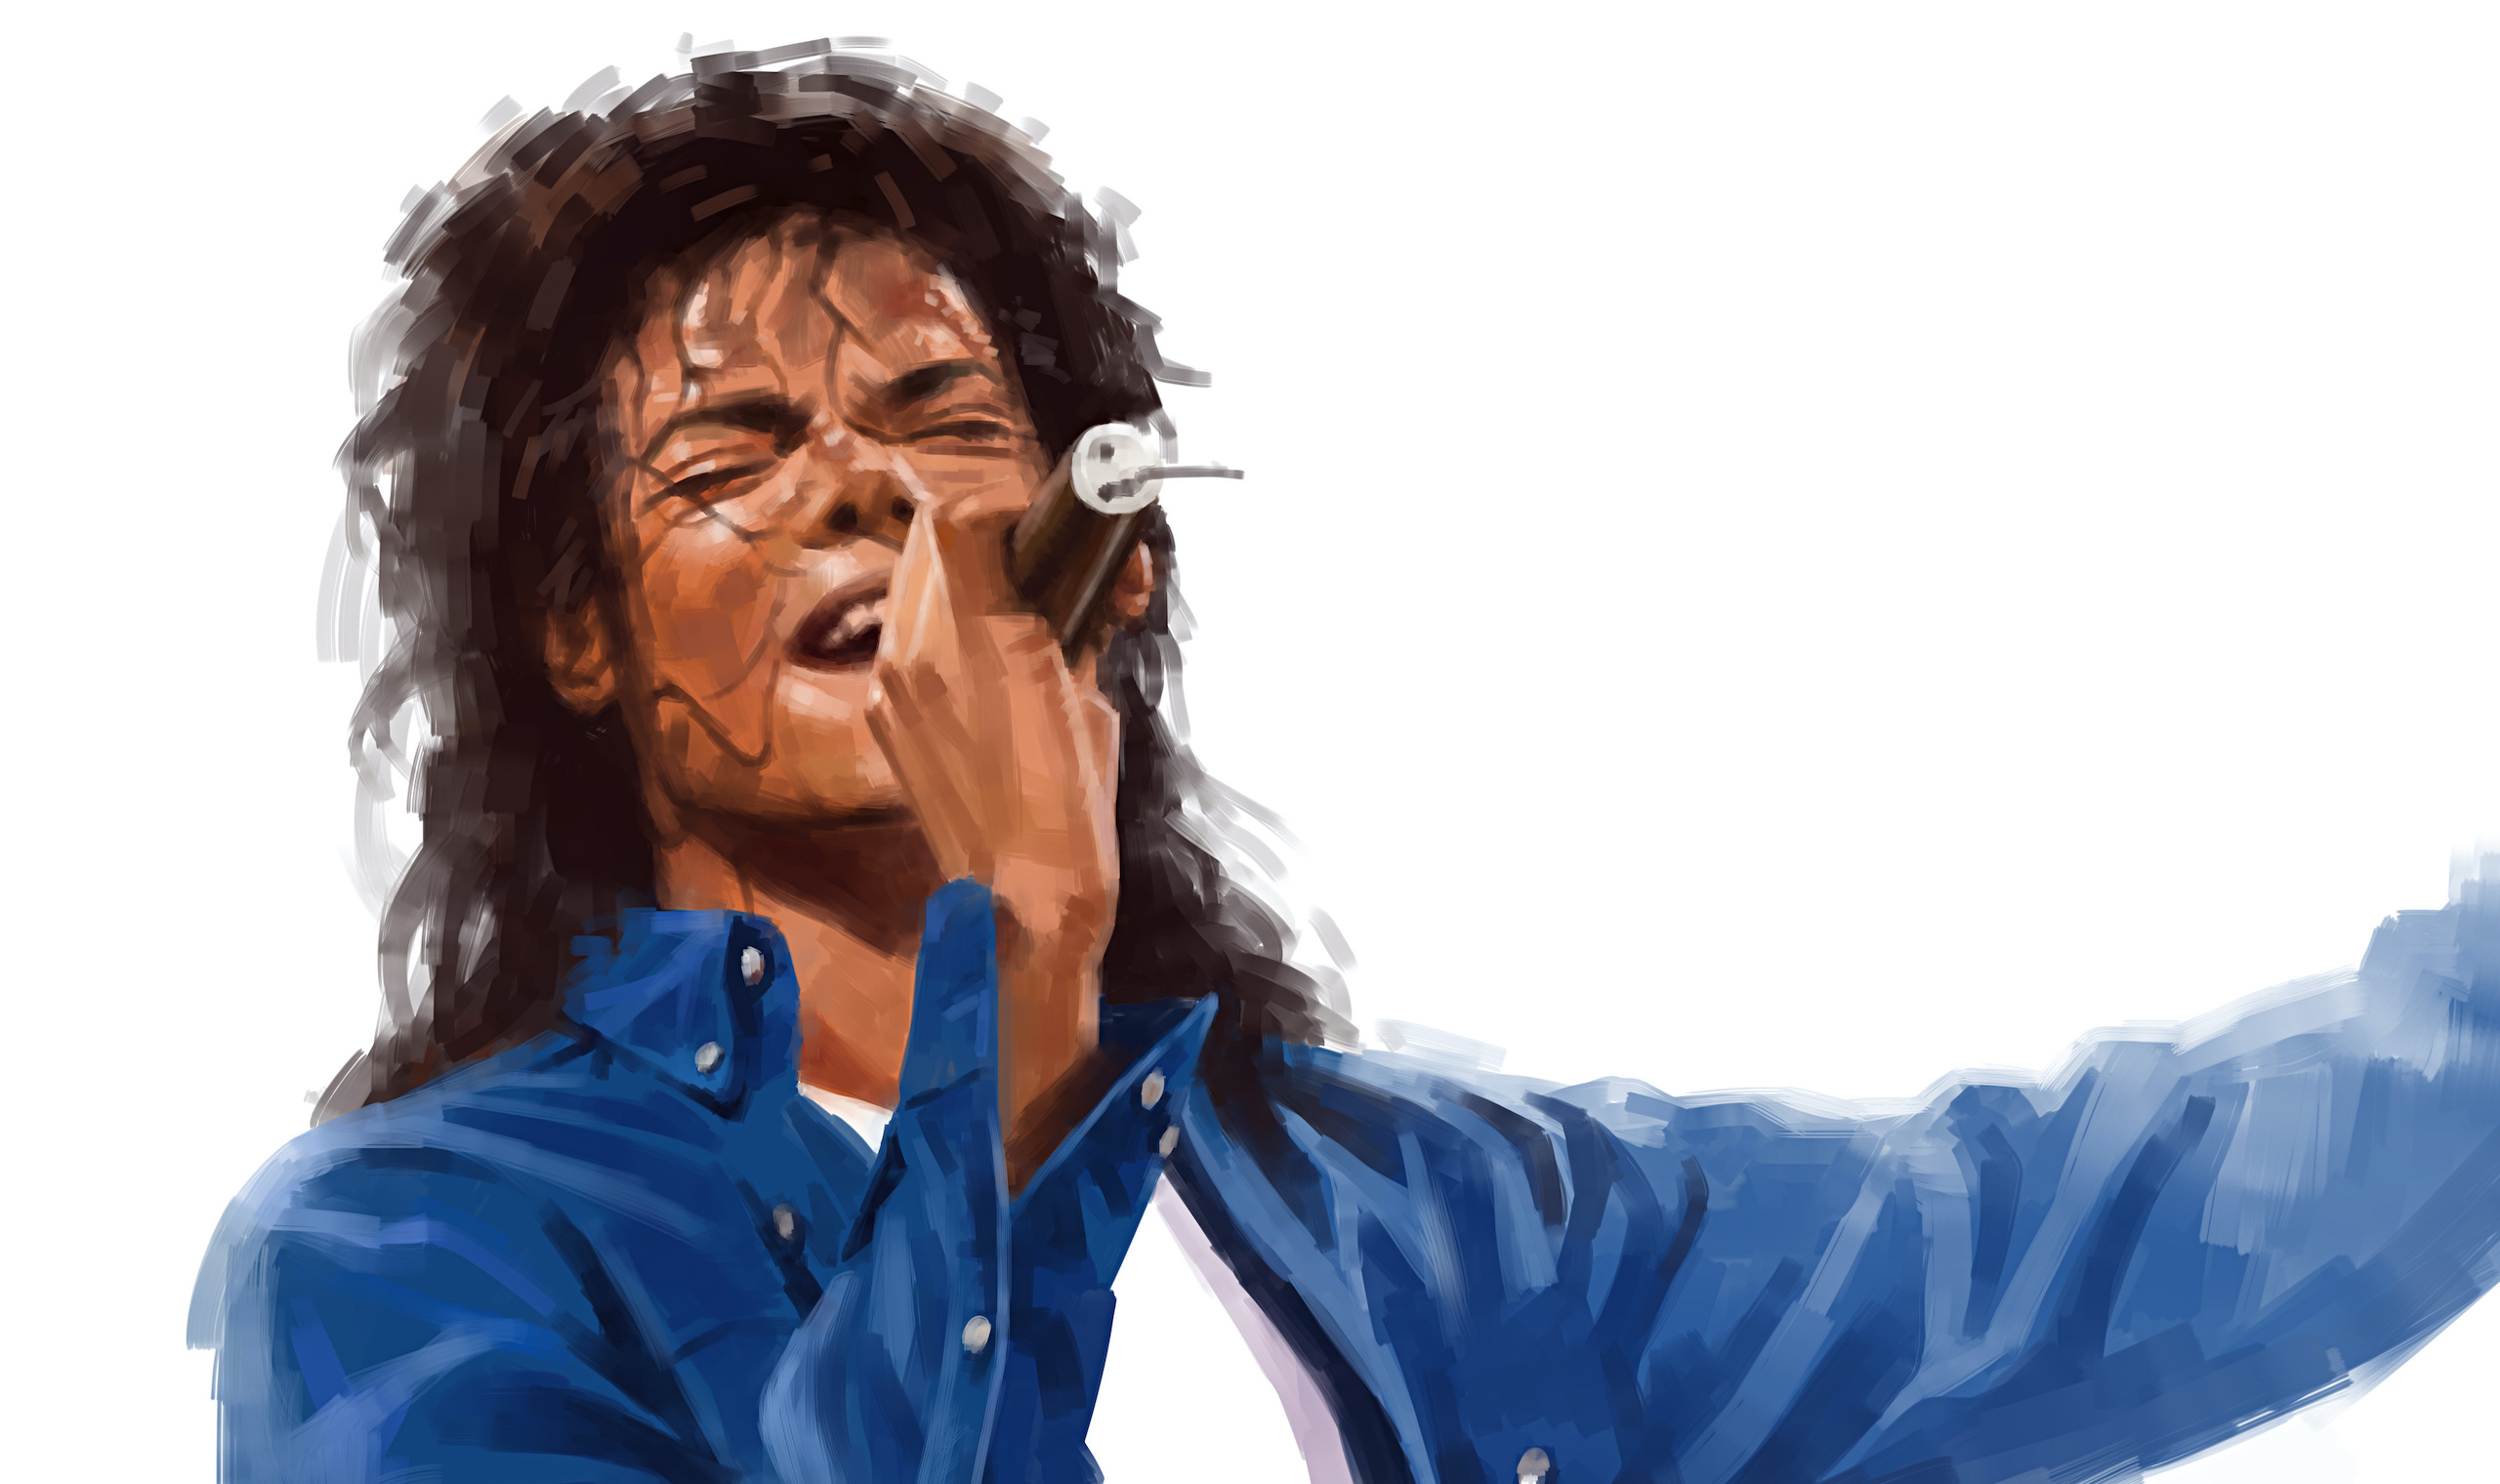 Justice-for-Michael-Jackson.jpg